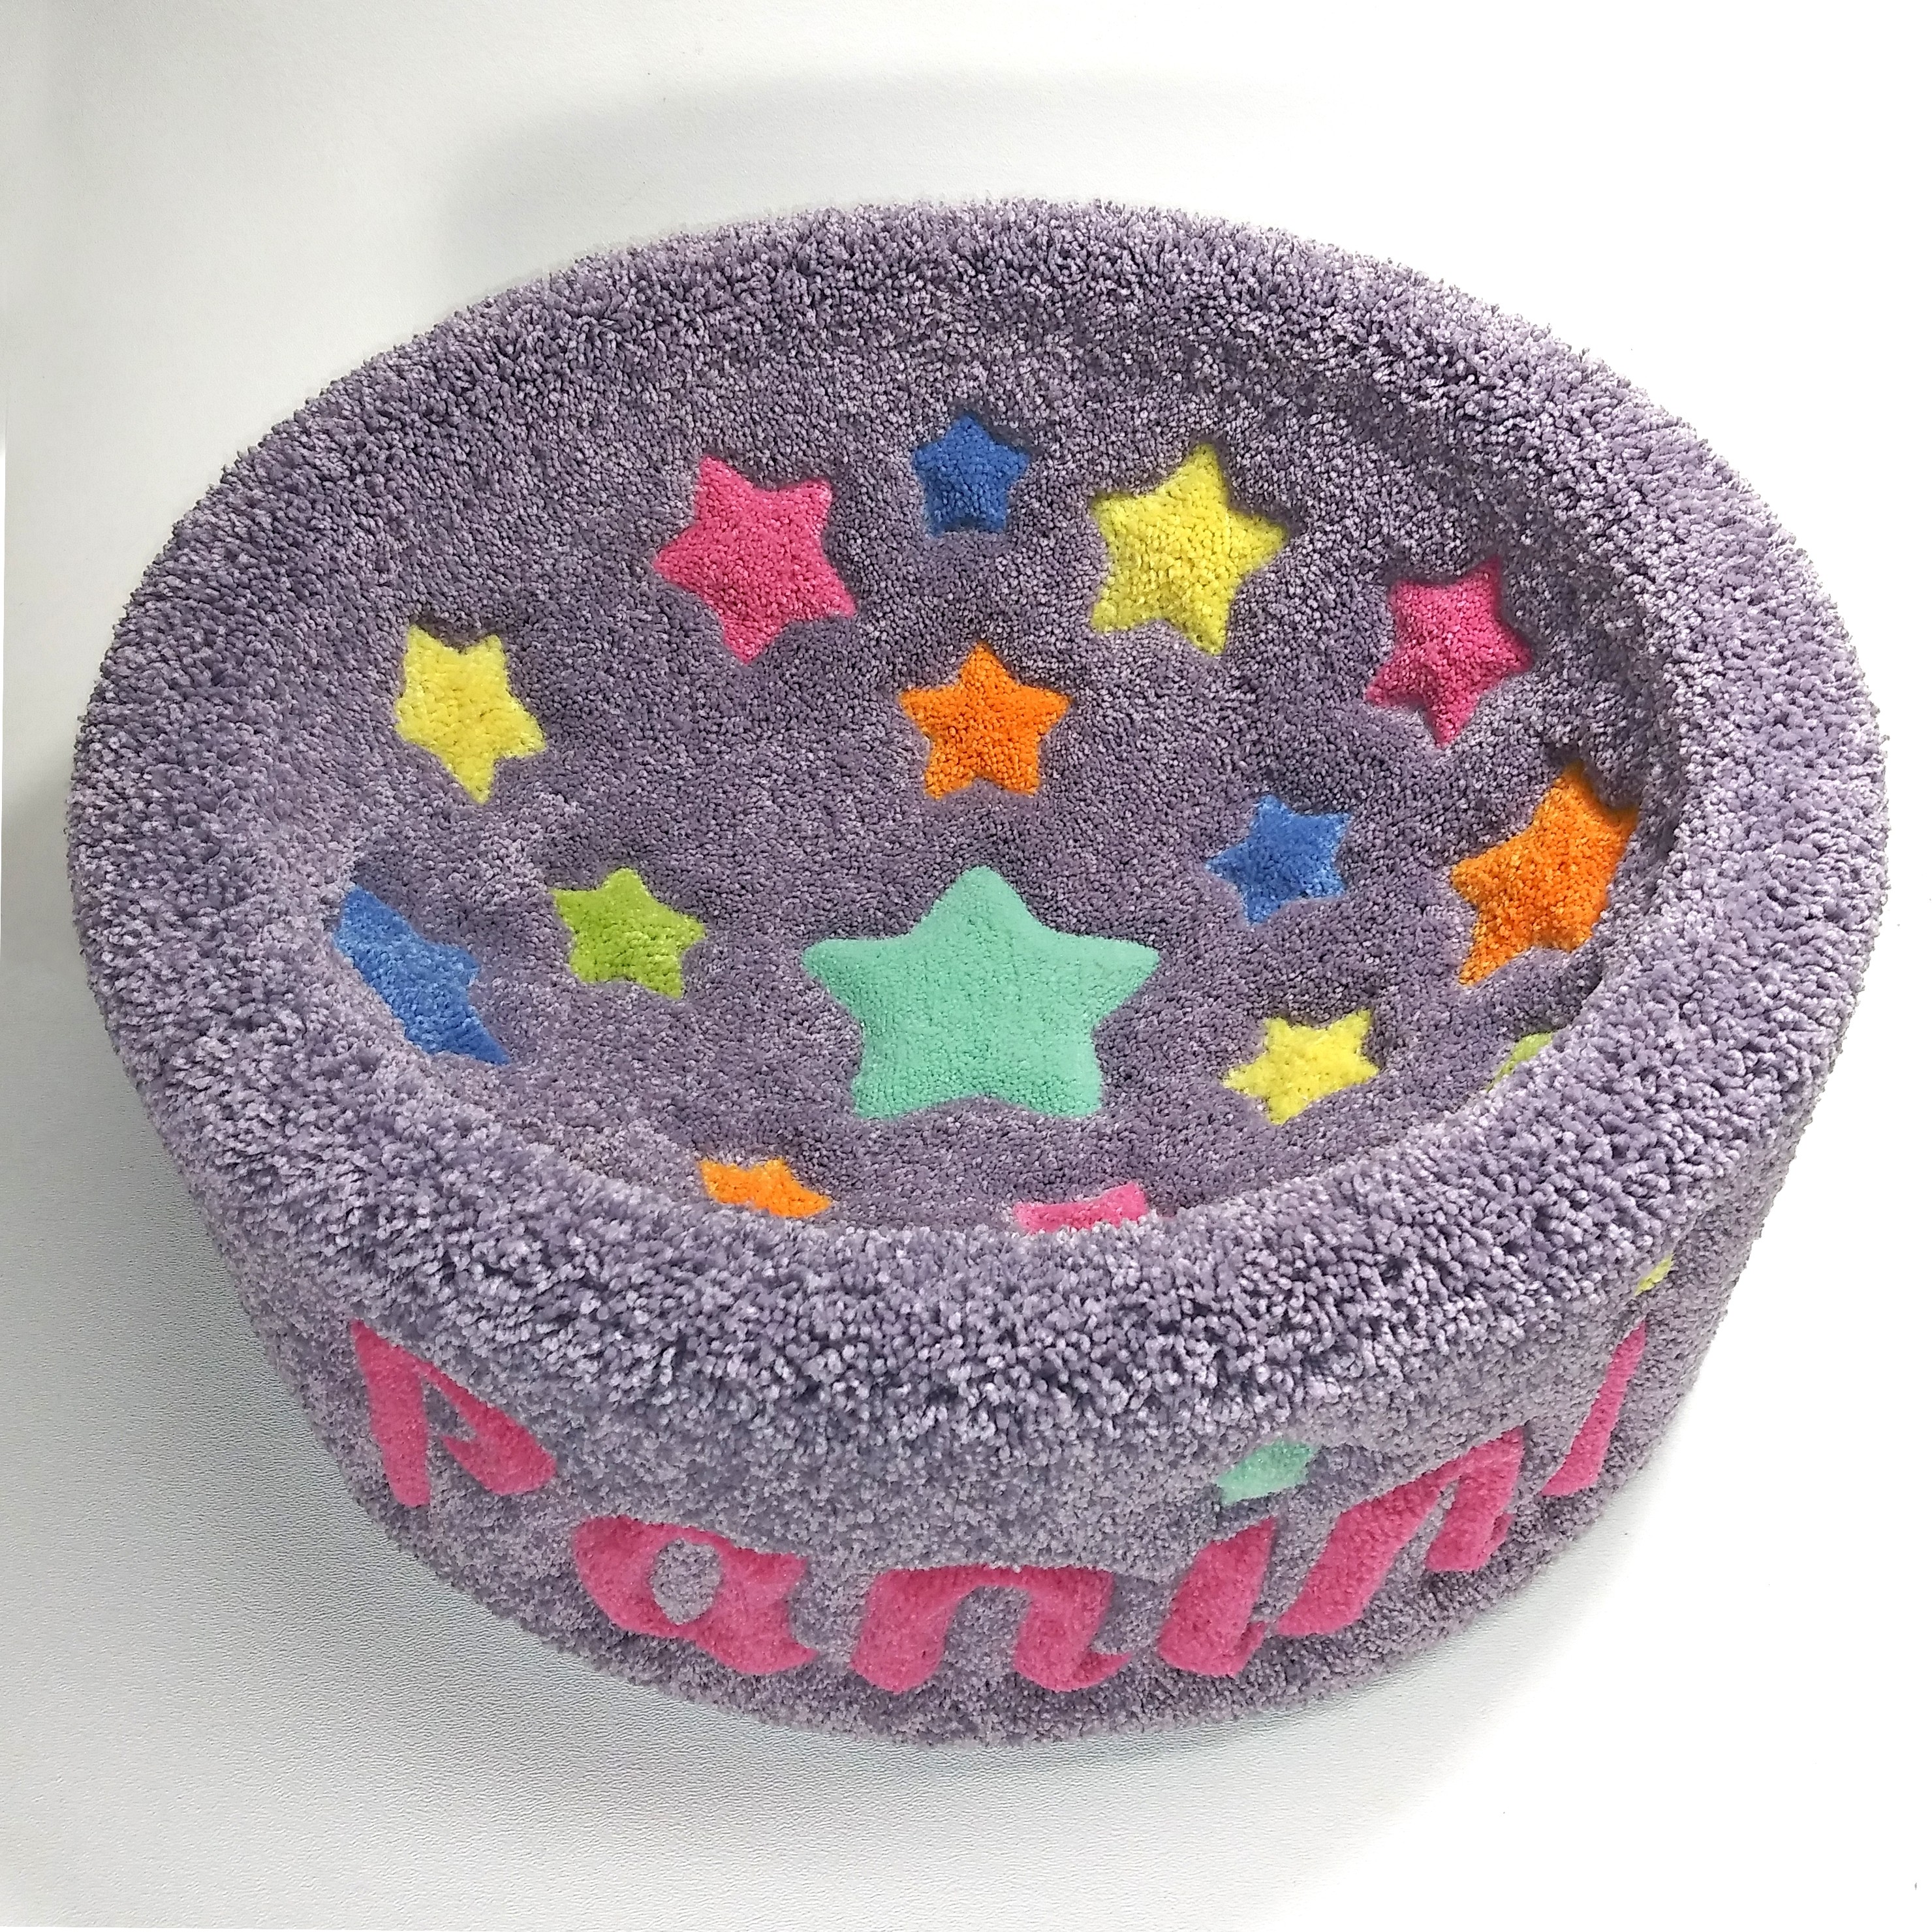 Superstar Kitty Bowl Cat Bed